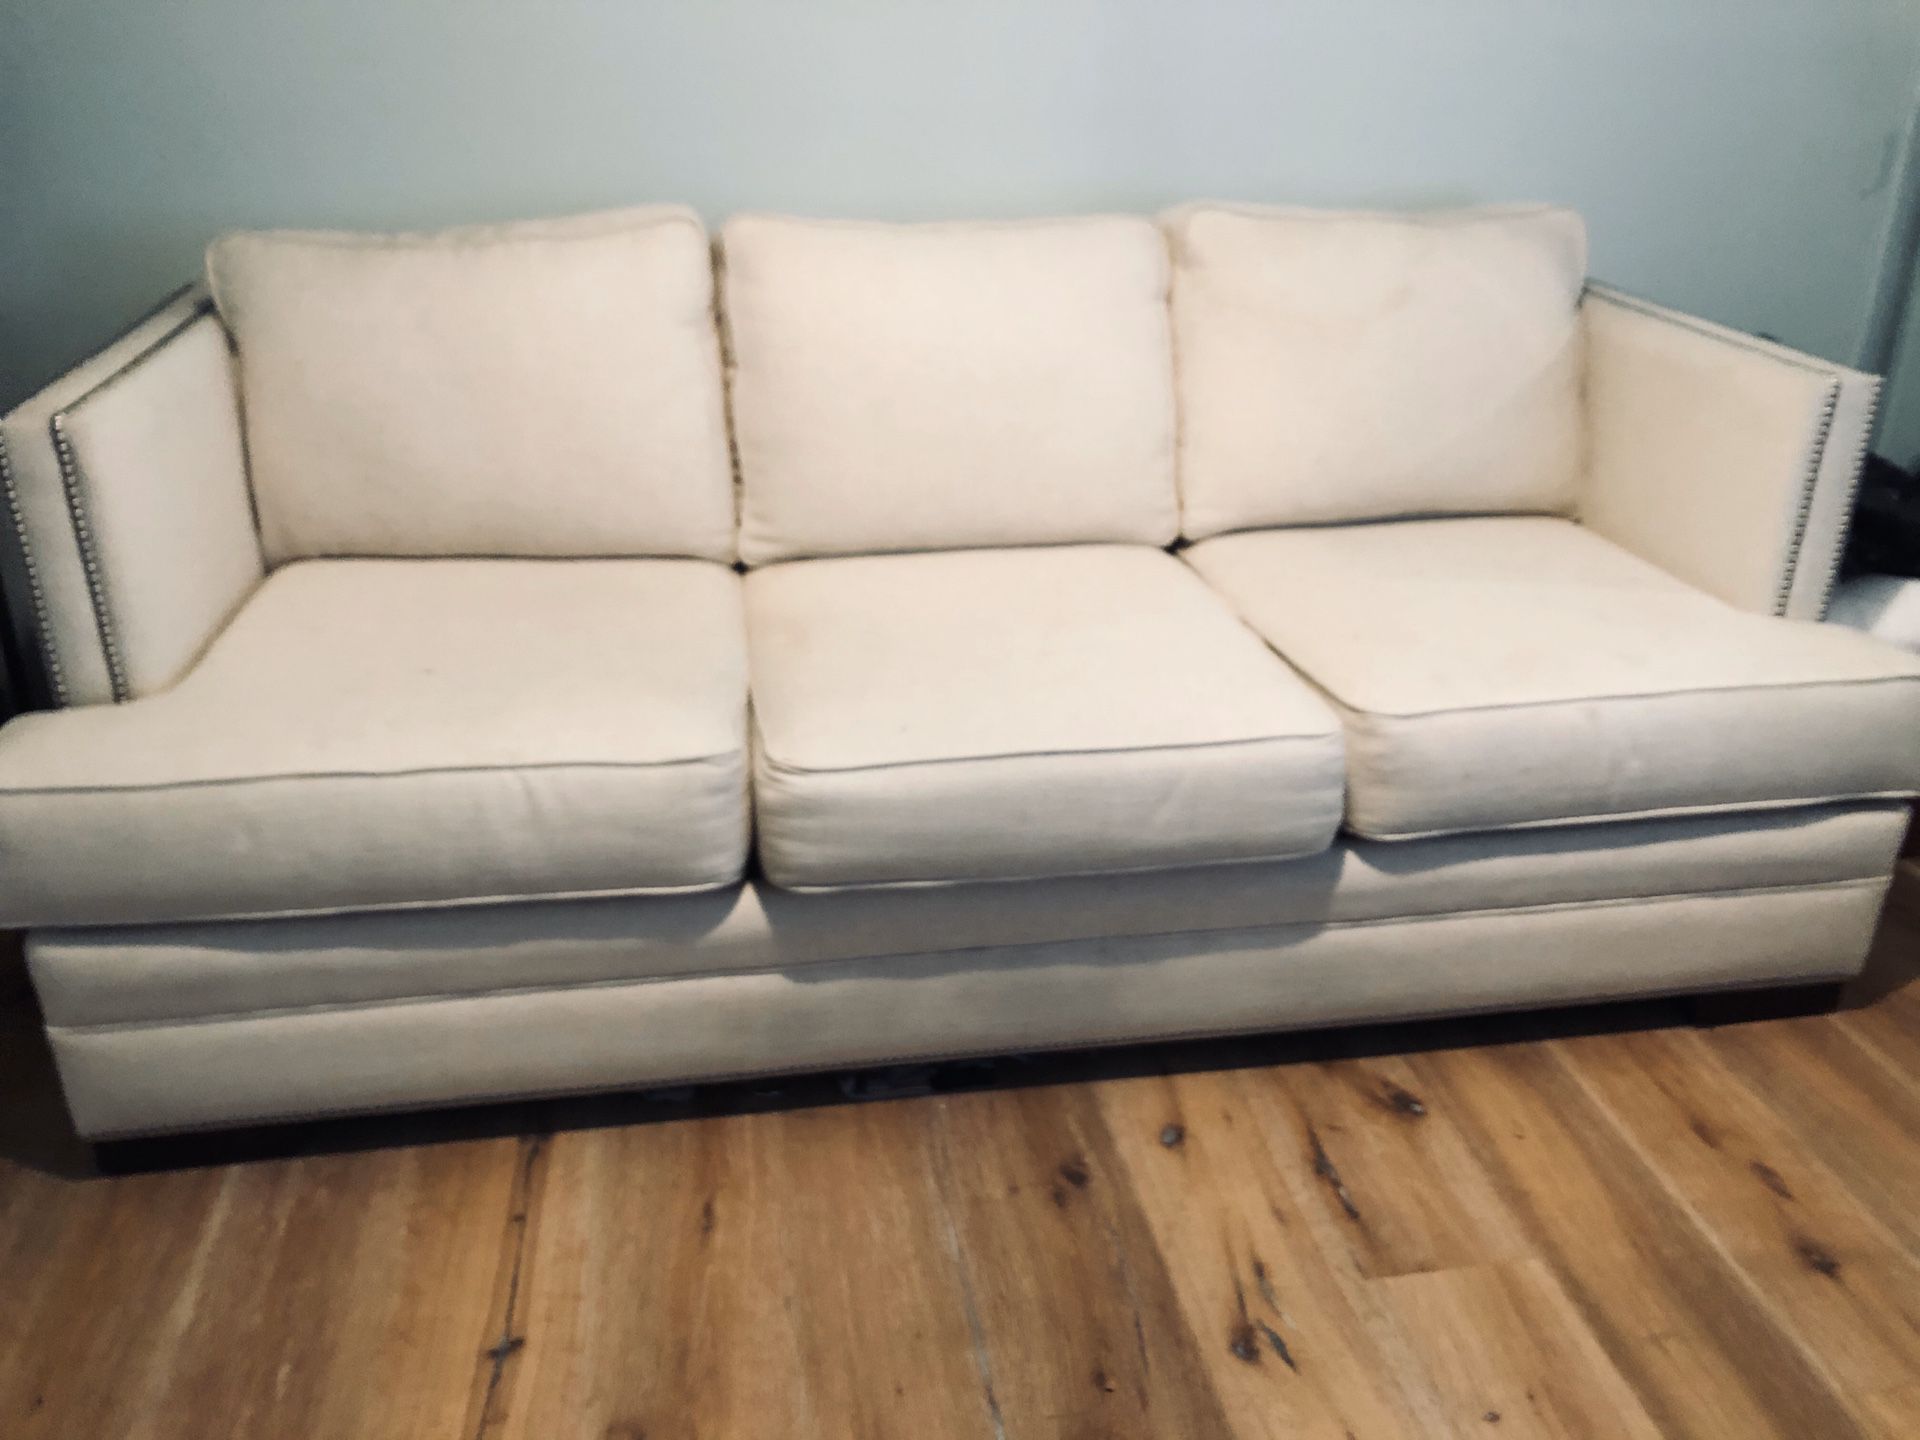 Cream linen couch with nailhead trim